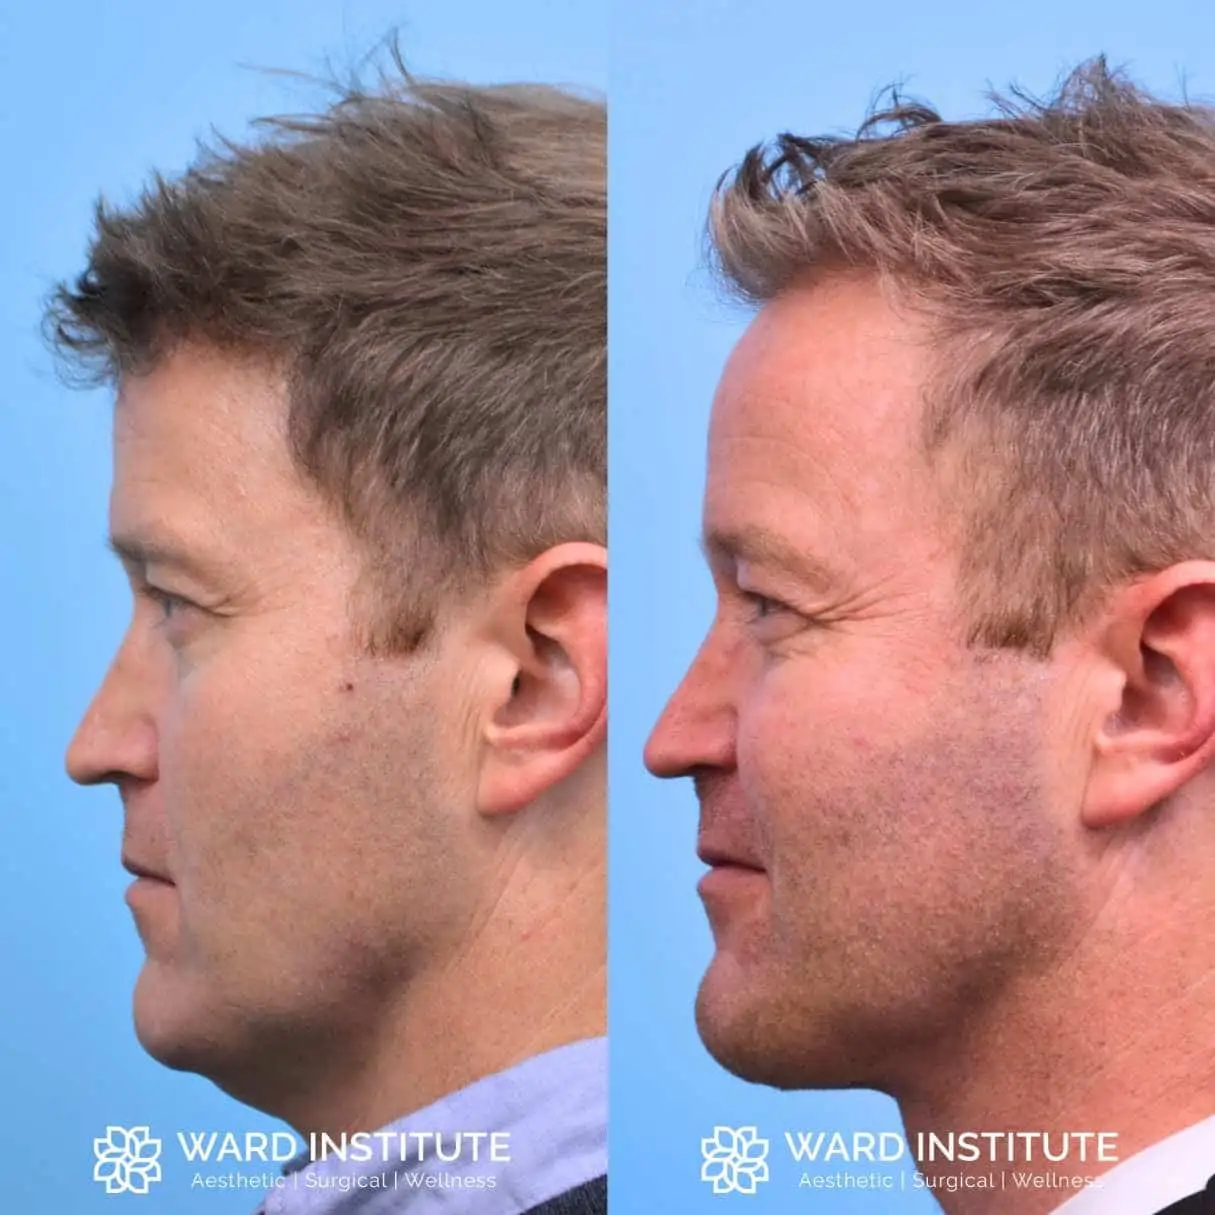 Before and after image of a chin augmentation.